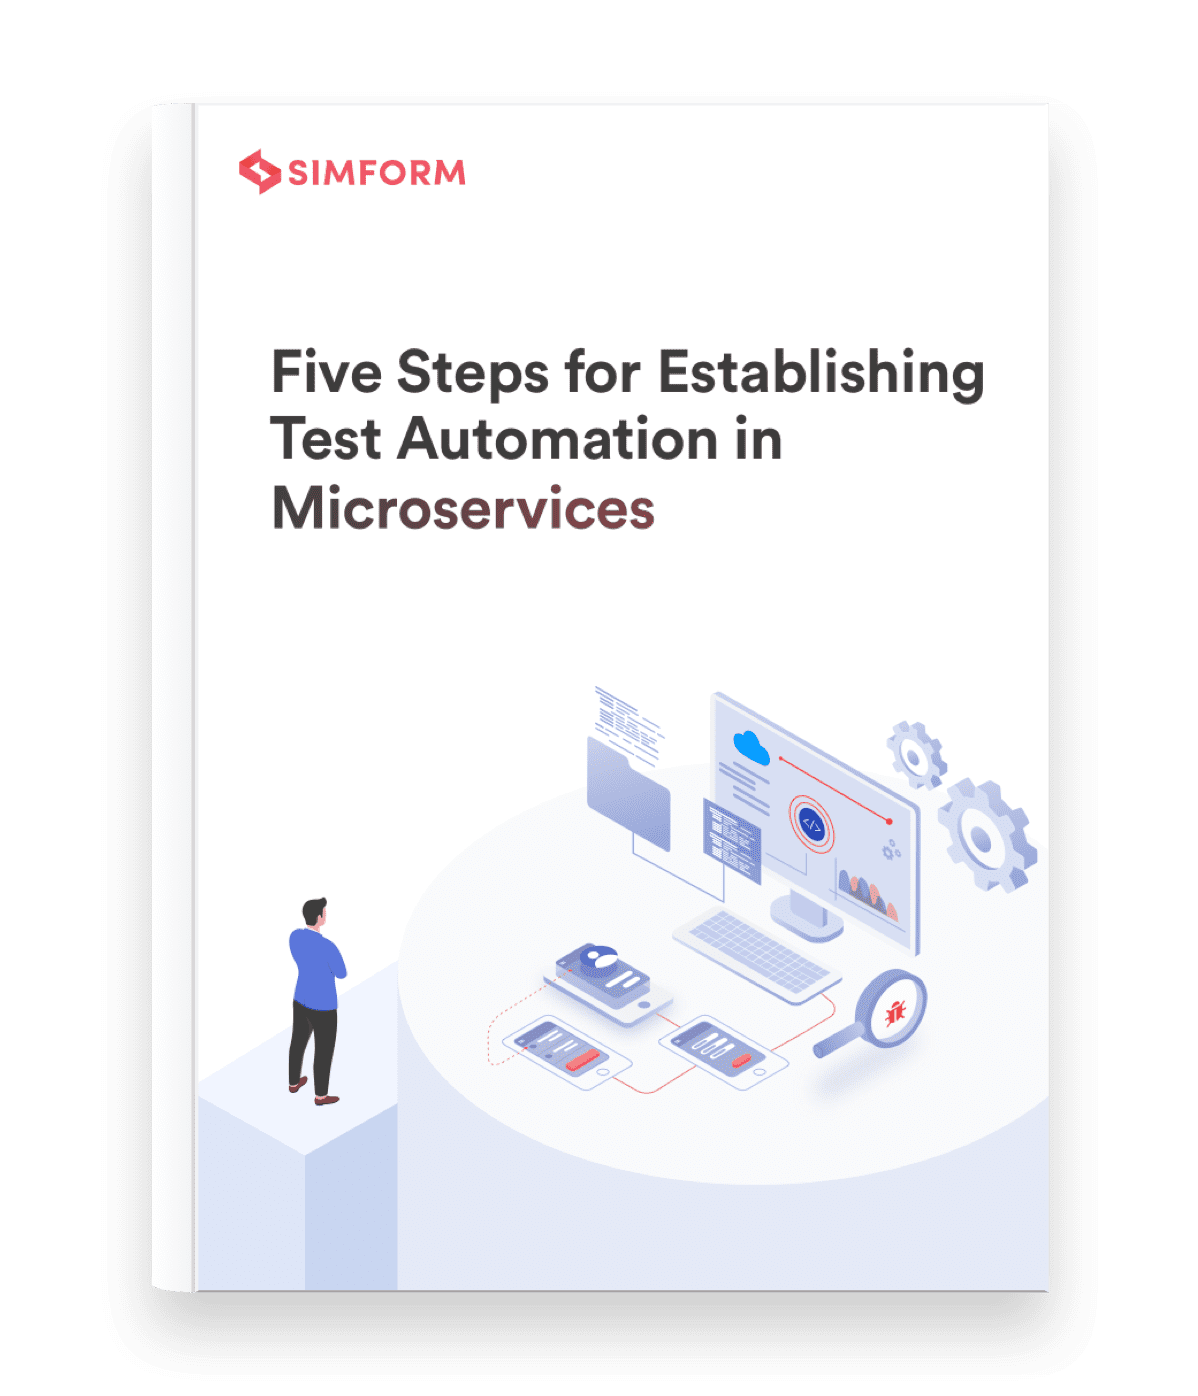 5 Steps for Establishing Test Automation in Microservices